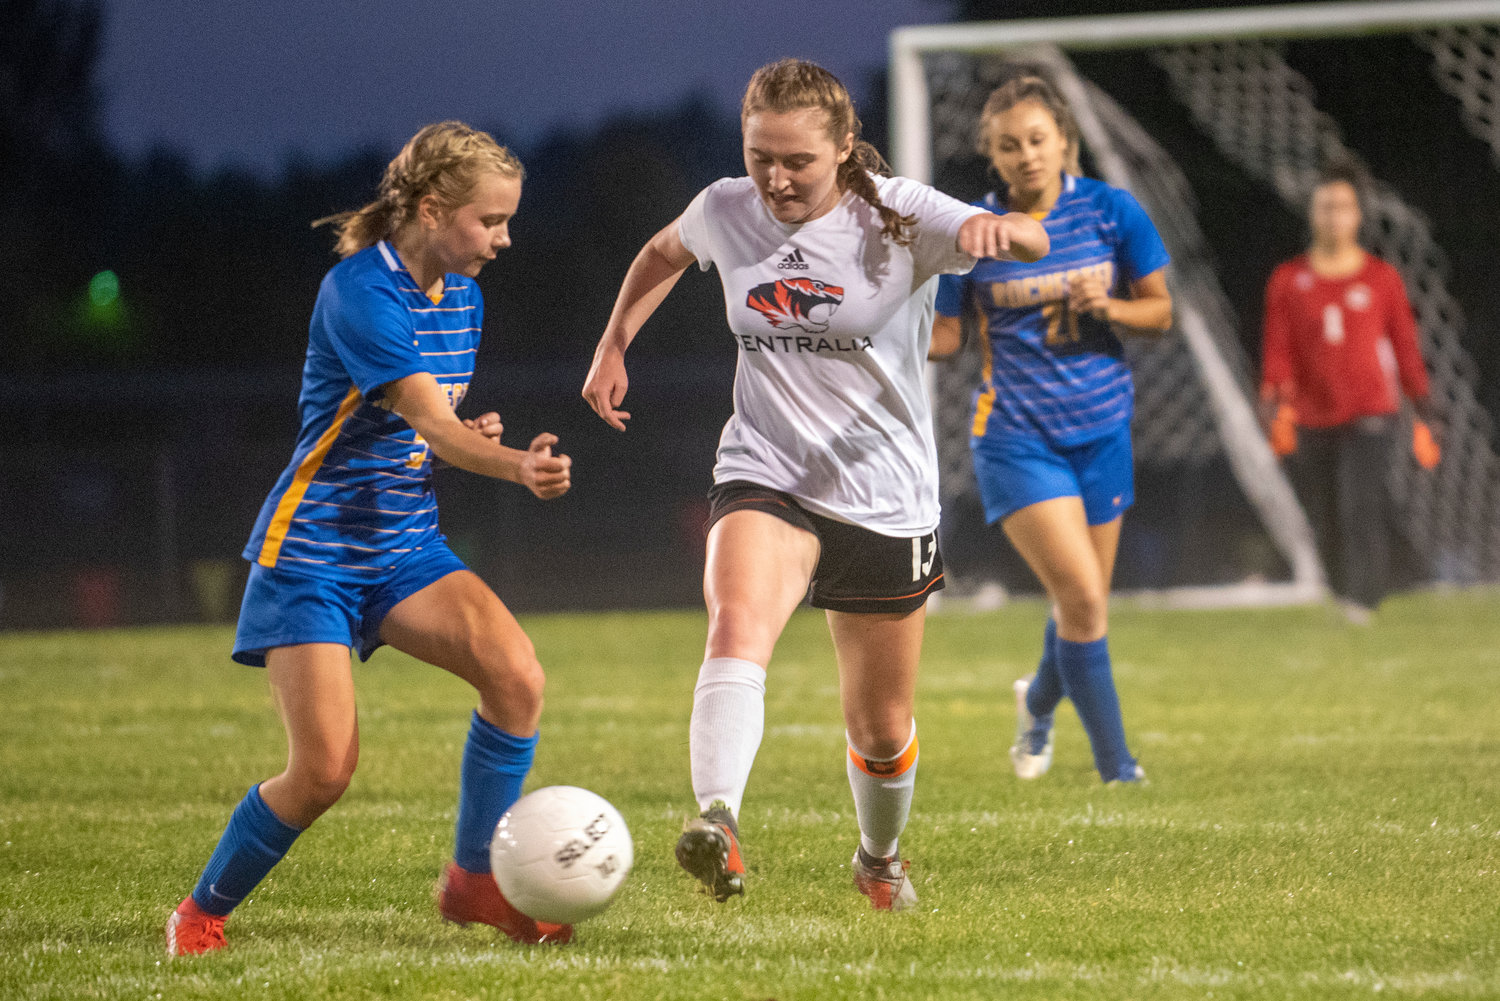 FILE PHOTO -- Centralia's Sarah Robbins (13) dribbles against Rochester's Piper Quarnstrom(5) in a match earlier this season.